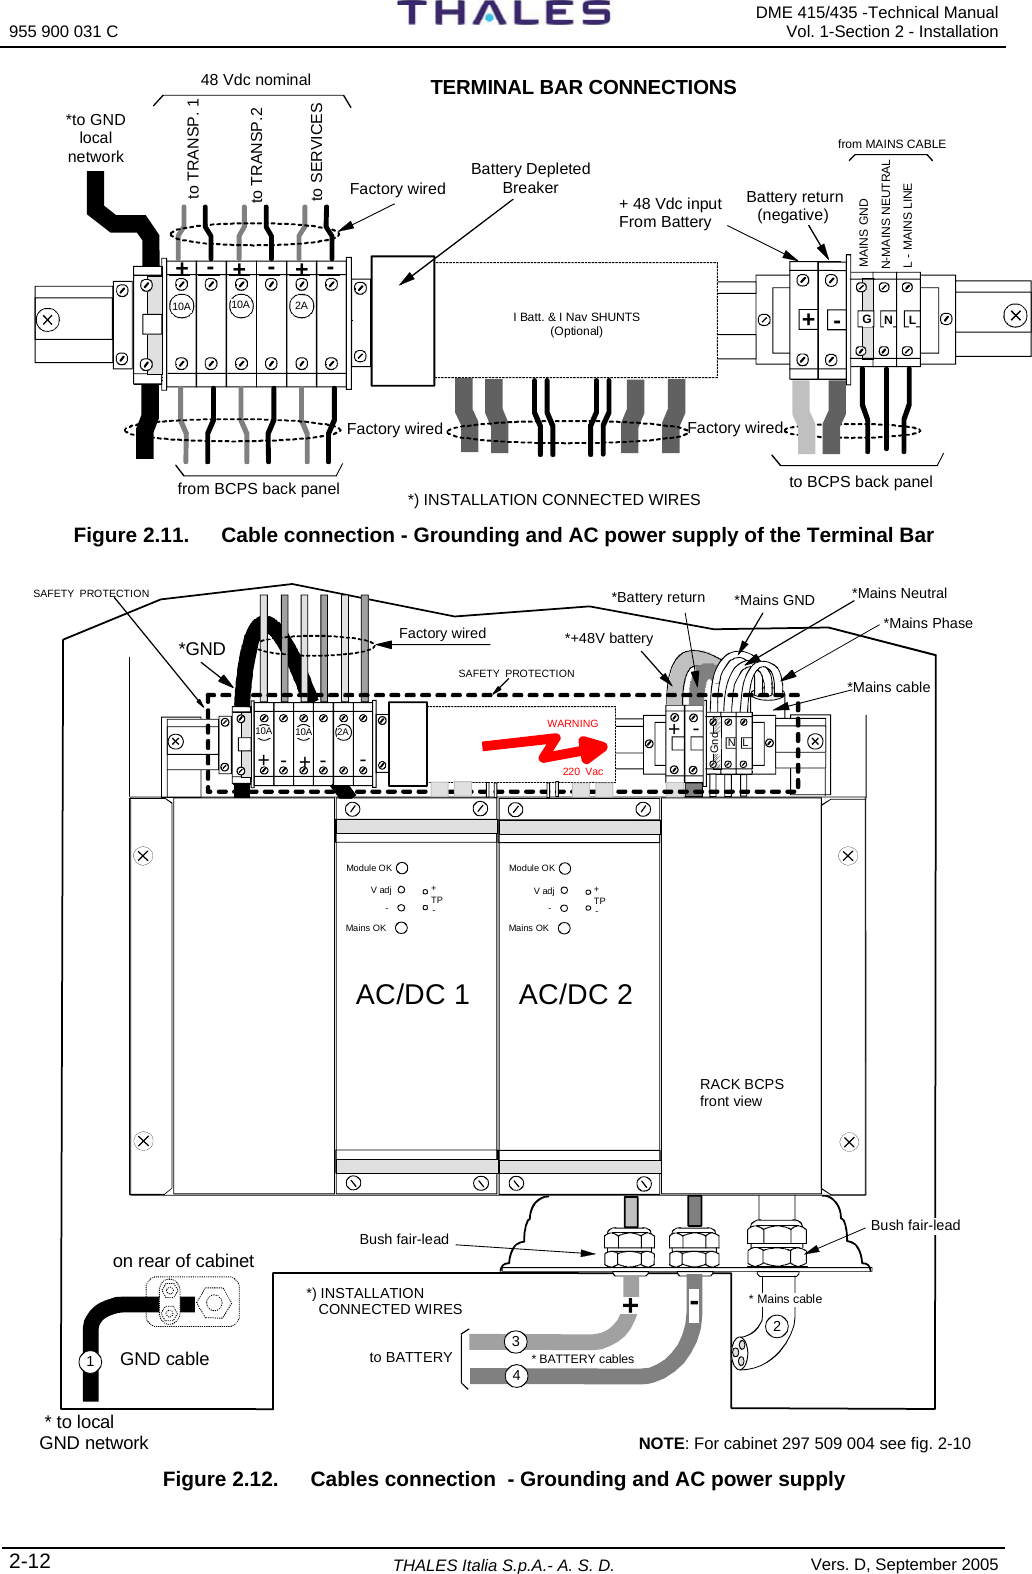 955 900 031 C   DME 415/435 -Technical Manual Vol. 1-Section 2 - Installation 2-12 THALES Italia S.p.A.- A. S. D. Vers. D, September 2005 + 48 Vdc inputFrom Battery +- Battery return(negative)MAINS GNDL - MAINS LINE N-MAINS NEUTRALFactory wiredFactory wiredFactory wired+++10A 2A10Ato TRANSP. 1to TRANSP.2to SERVICES48 Vdc nominalfrom BCPS back panelfrom MAINS CABLEto BCPS back panelGN L---*to GNDlocalnetworkTERMINAL BAR CONNECTIONS*) INSTALLATION CONNECTED WIRESI Batt. &amp; I Nav SHUNTS(Optional)Battery Depleted Breaker Figure 2.11.   Cable connection - Grounding and AC power supply of the Terminal Bar   * BATTERY cablesGND cableFactory wired*GND *+48V battery*Battery return *Mains cable * to local GND networkBush fair-leadto BATTERY*Mains GND*Mains Phase*Mains NeutralRACK BCPSfront viewSAFETY PROTECTIONSAFETY PROTECTIONAC/DC 1Module OKMains OKV adj-TP+-AC/DC 2Module OKMains OKV adj-TP+-10A  +-LNGnd++---+-2A+10A3421220 VacWARNINGon rear of cabinet  * Mains cableBush fair-lead*) INSTALLATION    CONNECTED WIRES Figure 2.12.   Cables connection  - Grounding and AC power supply  NOTE: For cabinet 297 509 004 see fig. 2-10 